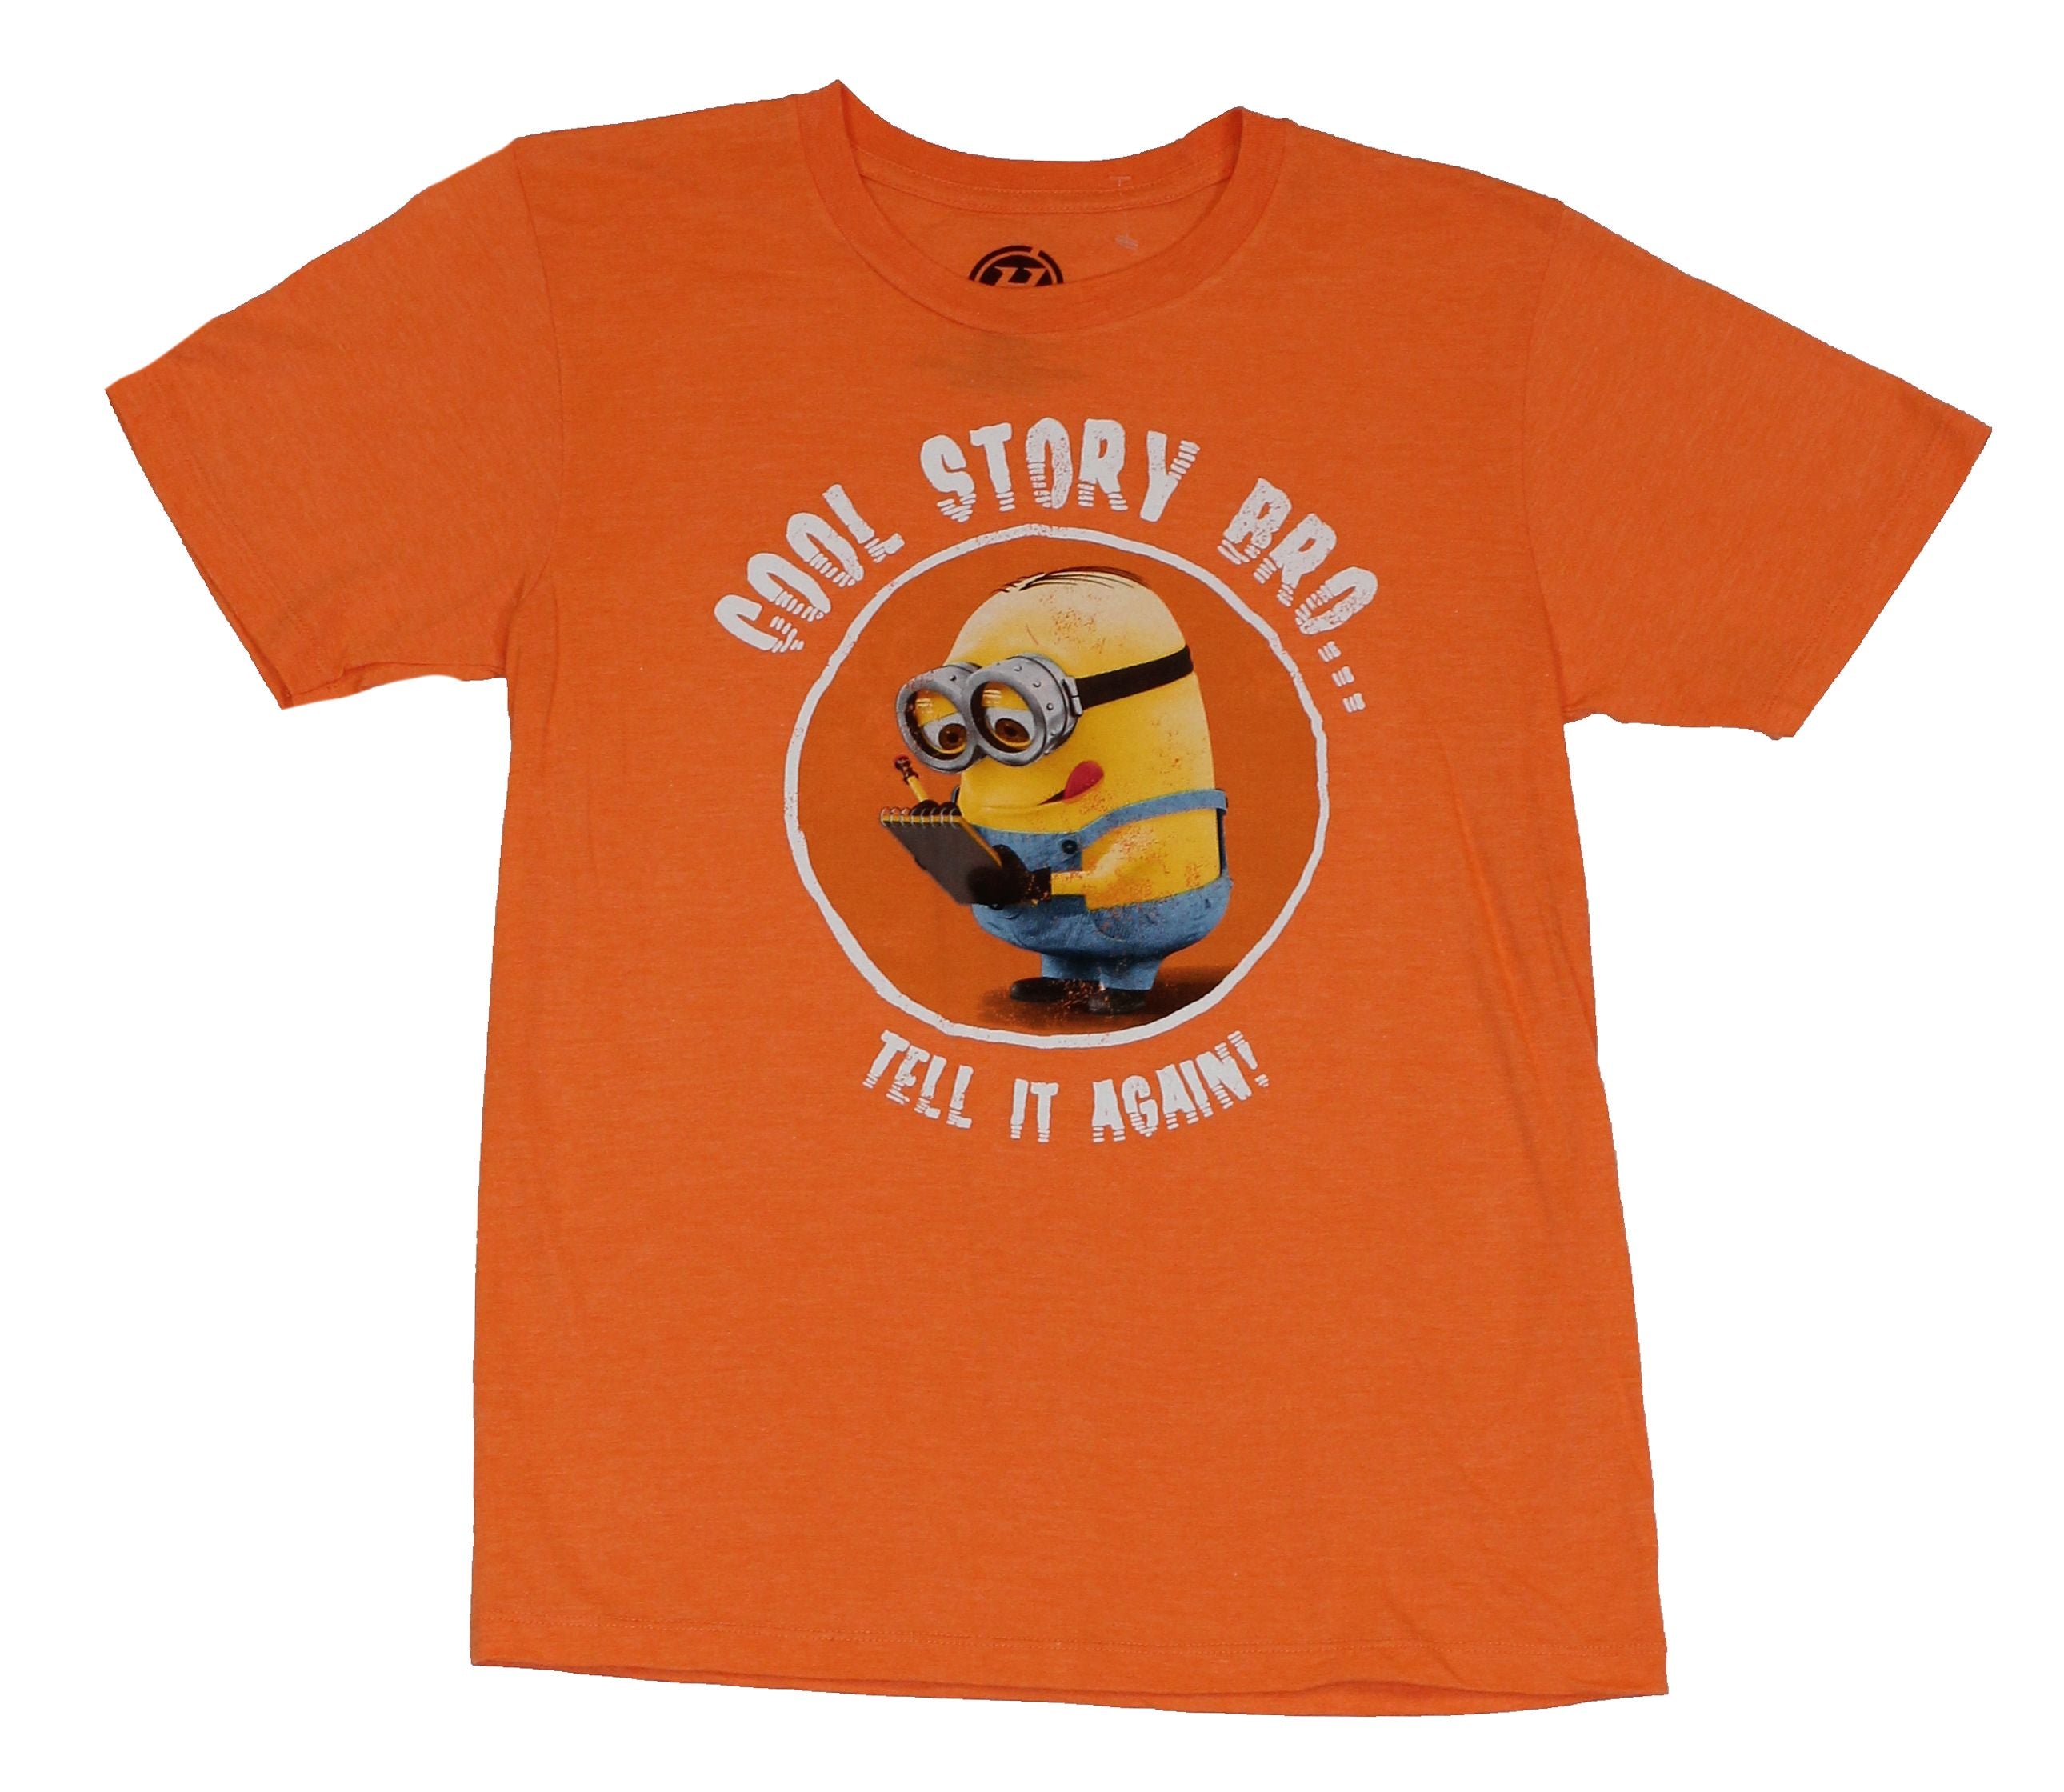 Despicable Me Mens T-Shirt - "Cool Story BroTell It Again" Noting Minon Pic